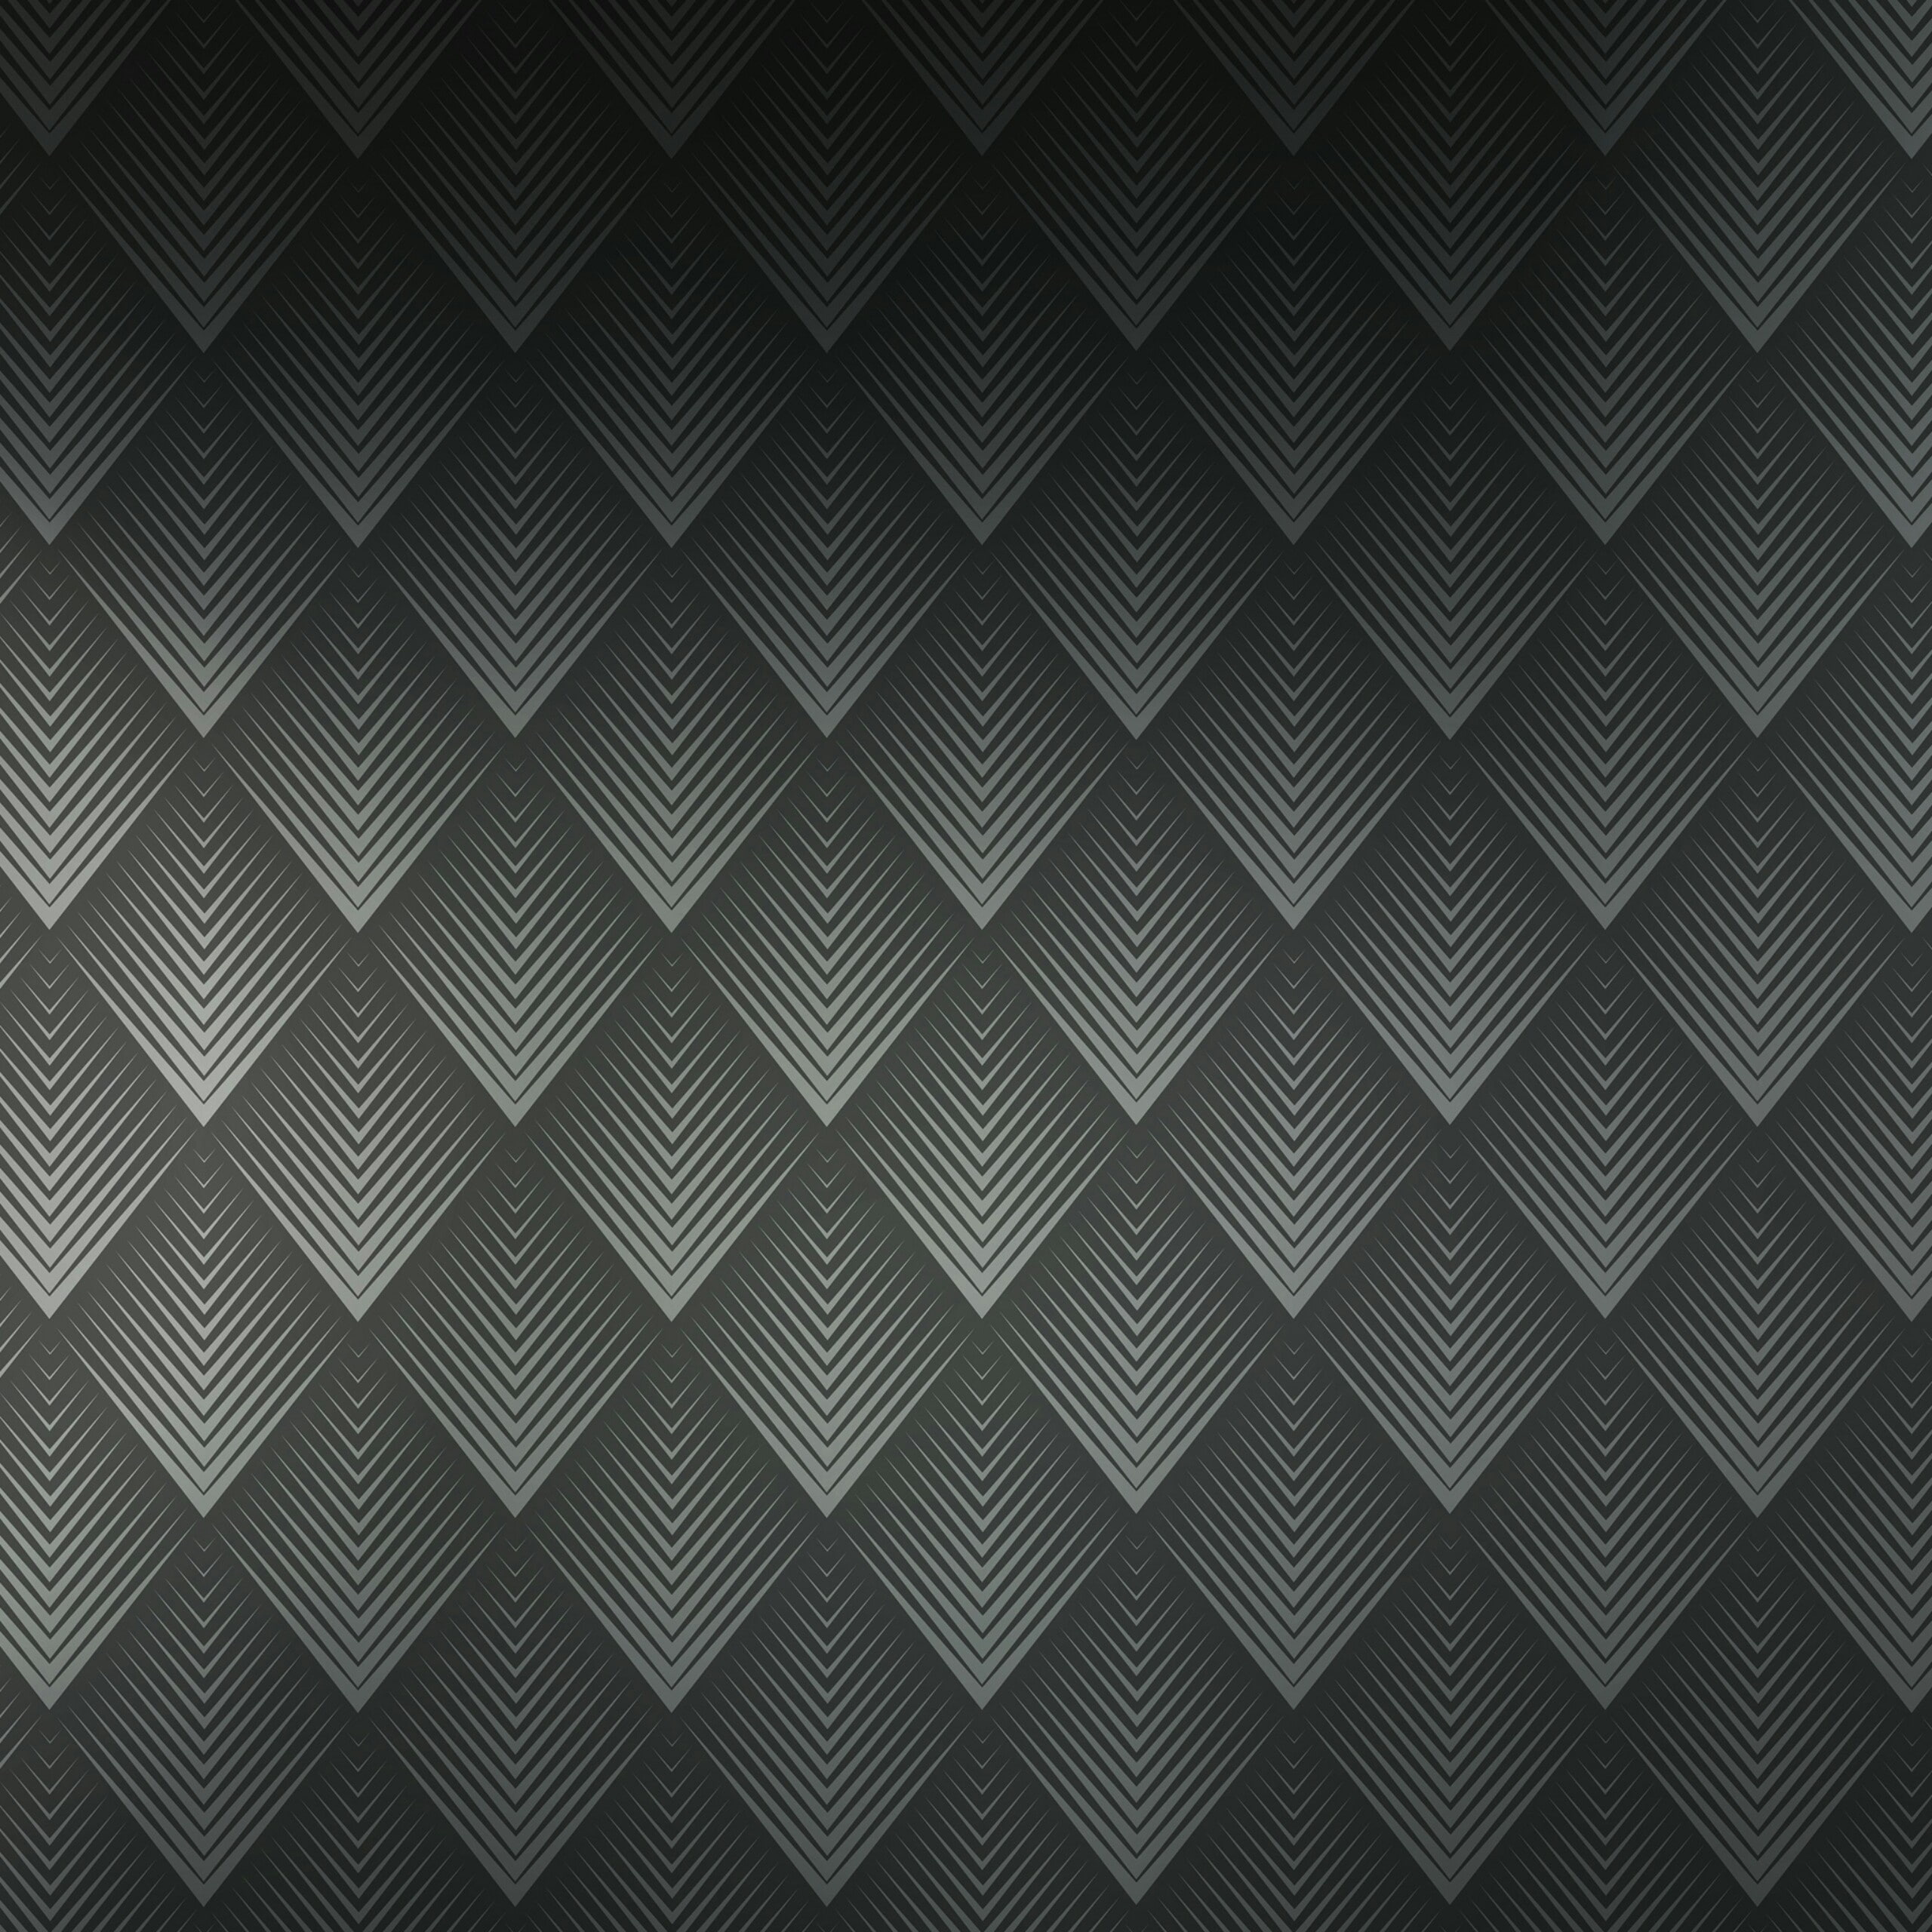 texture, abstract, pattern, gray, qhd-wallpaper, backgrounds